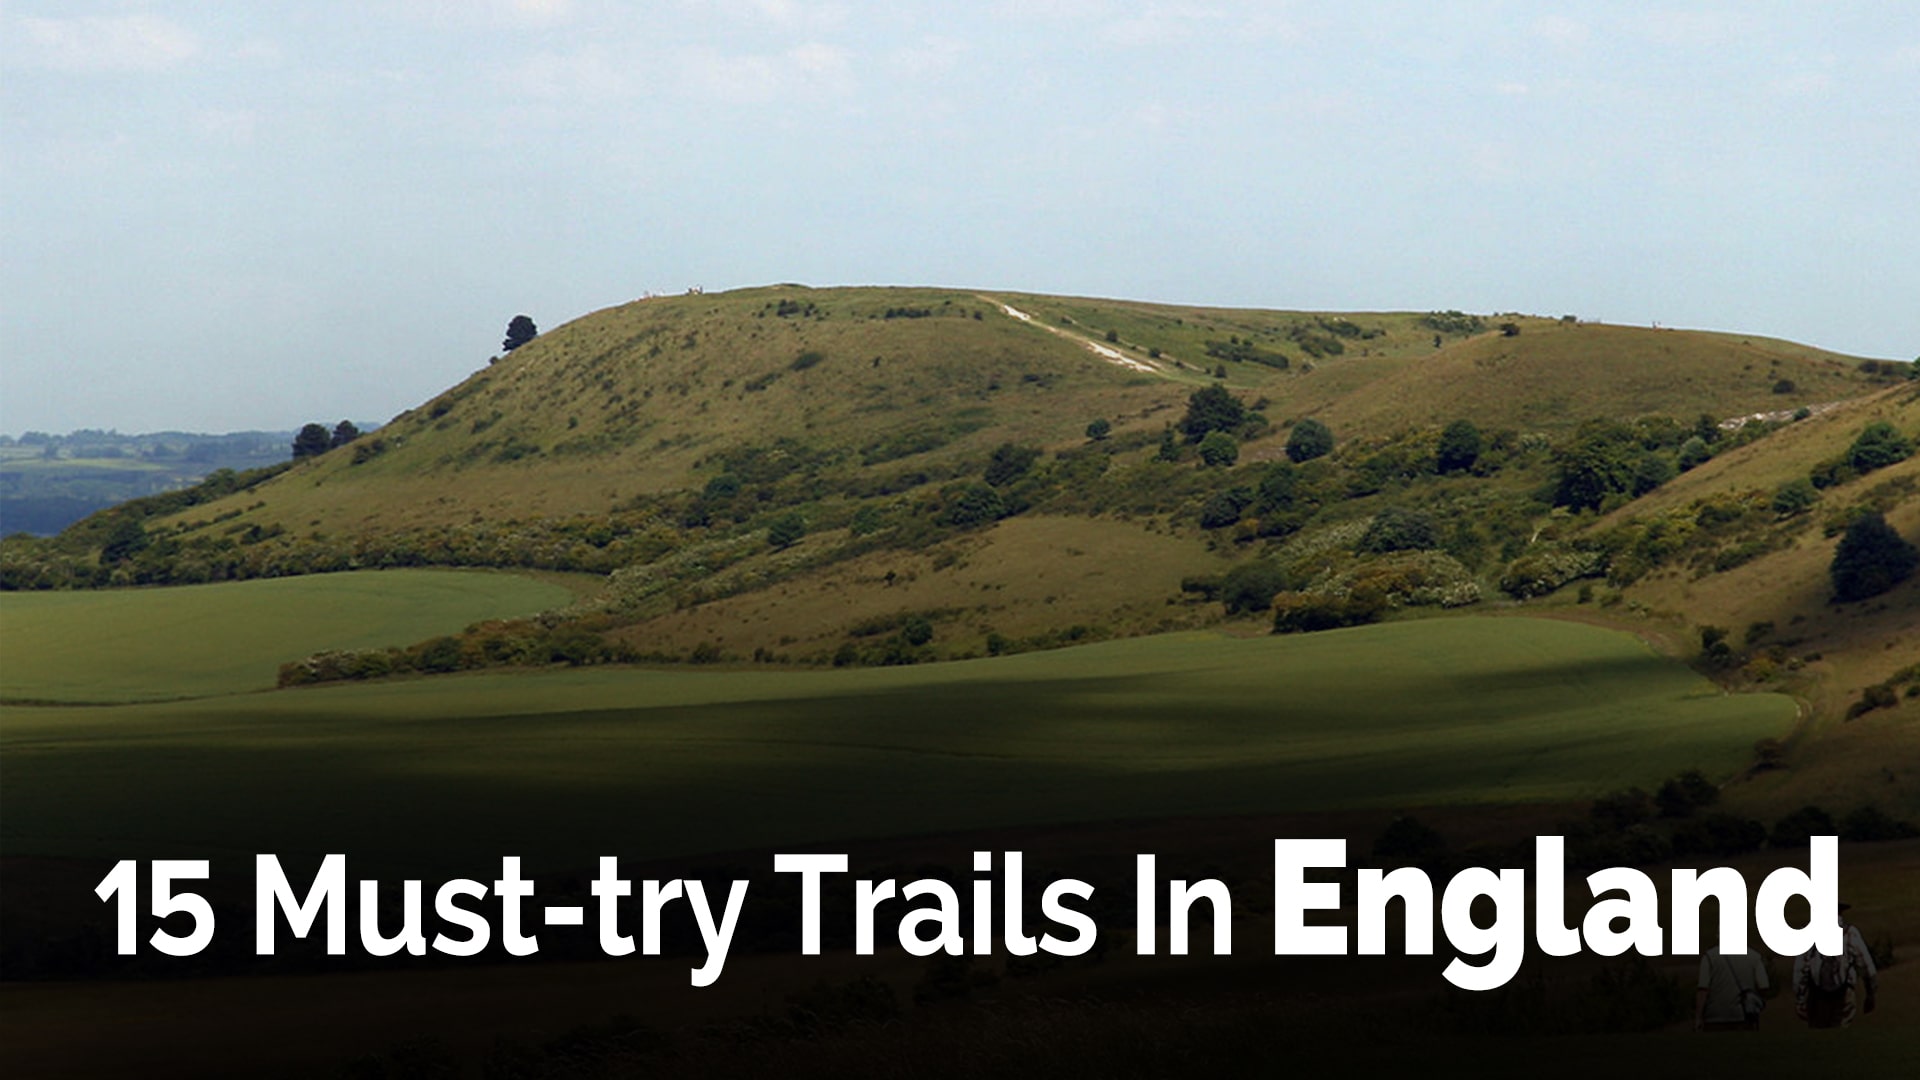 15 Must-try Trails In England